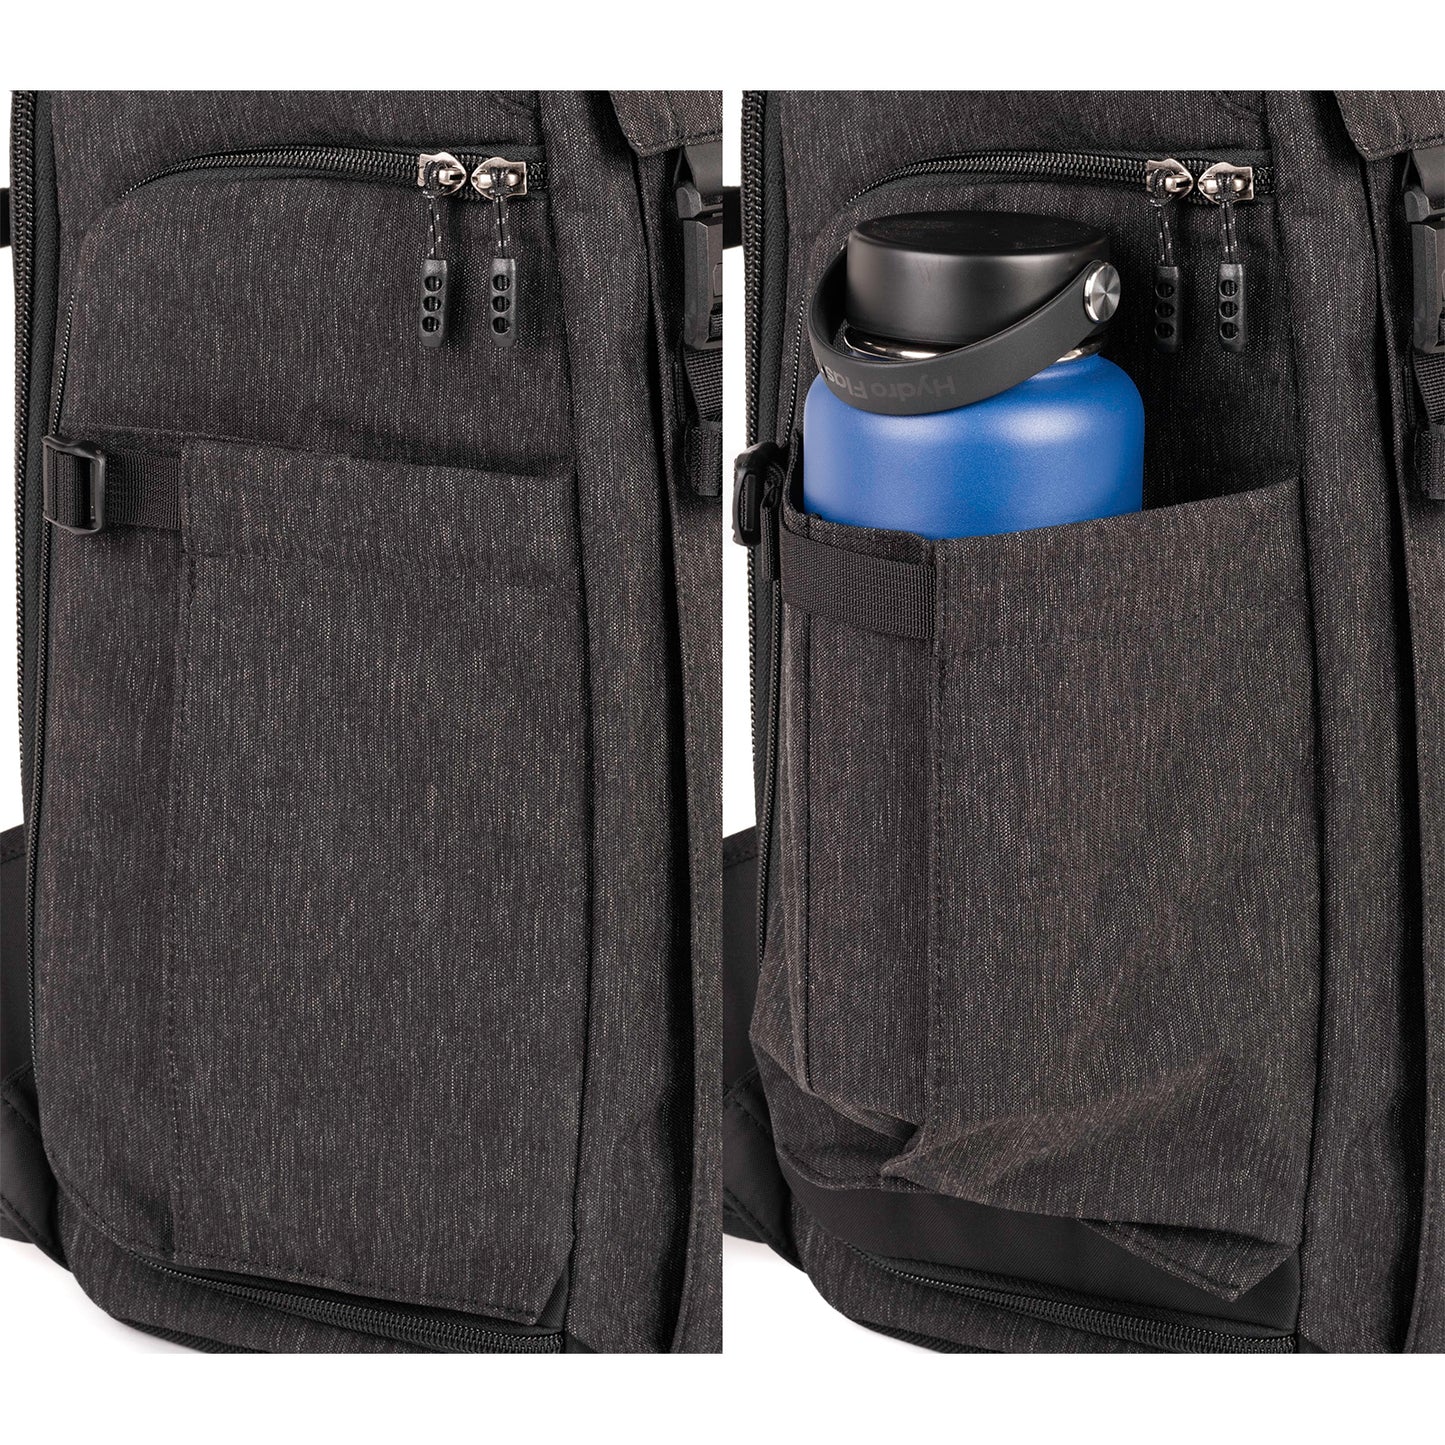 
                  
                    Expandable water bottle pockets on both sides
                  
                